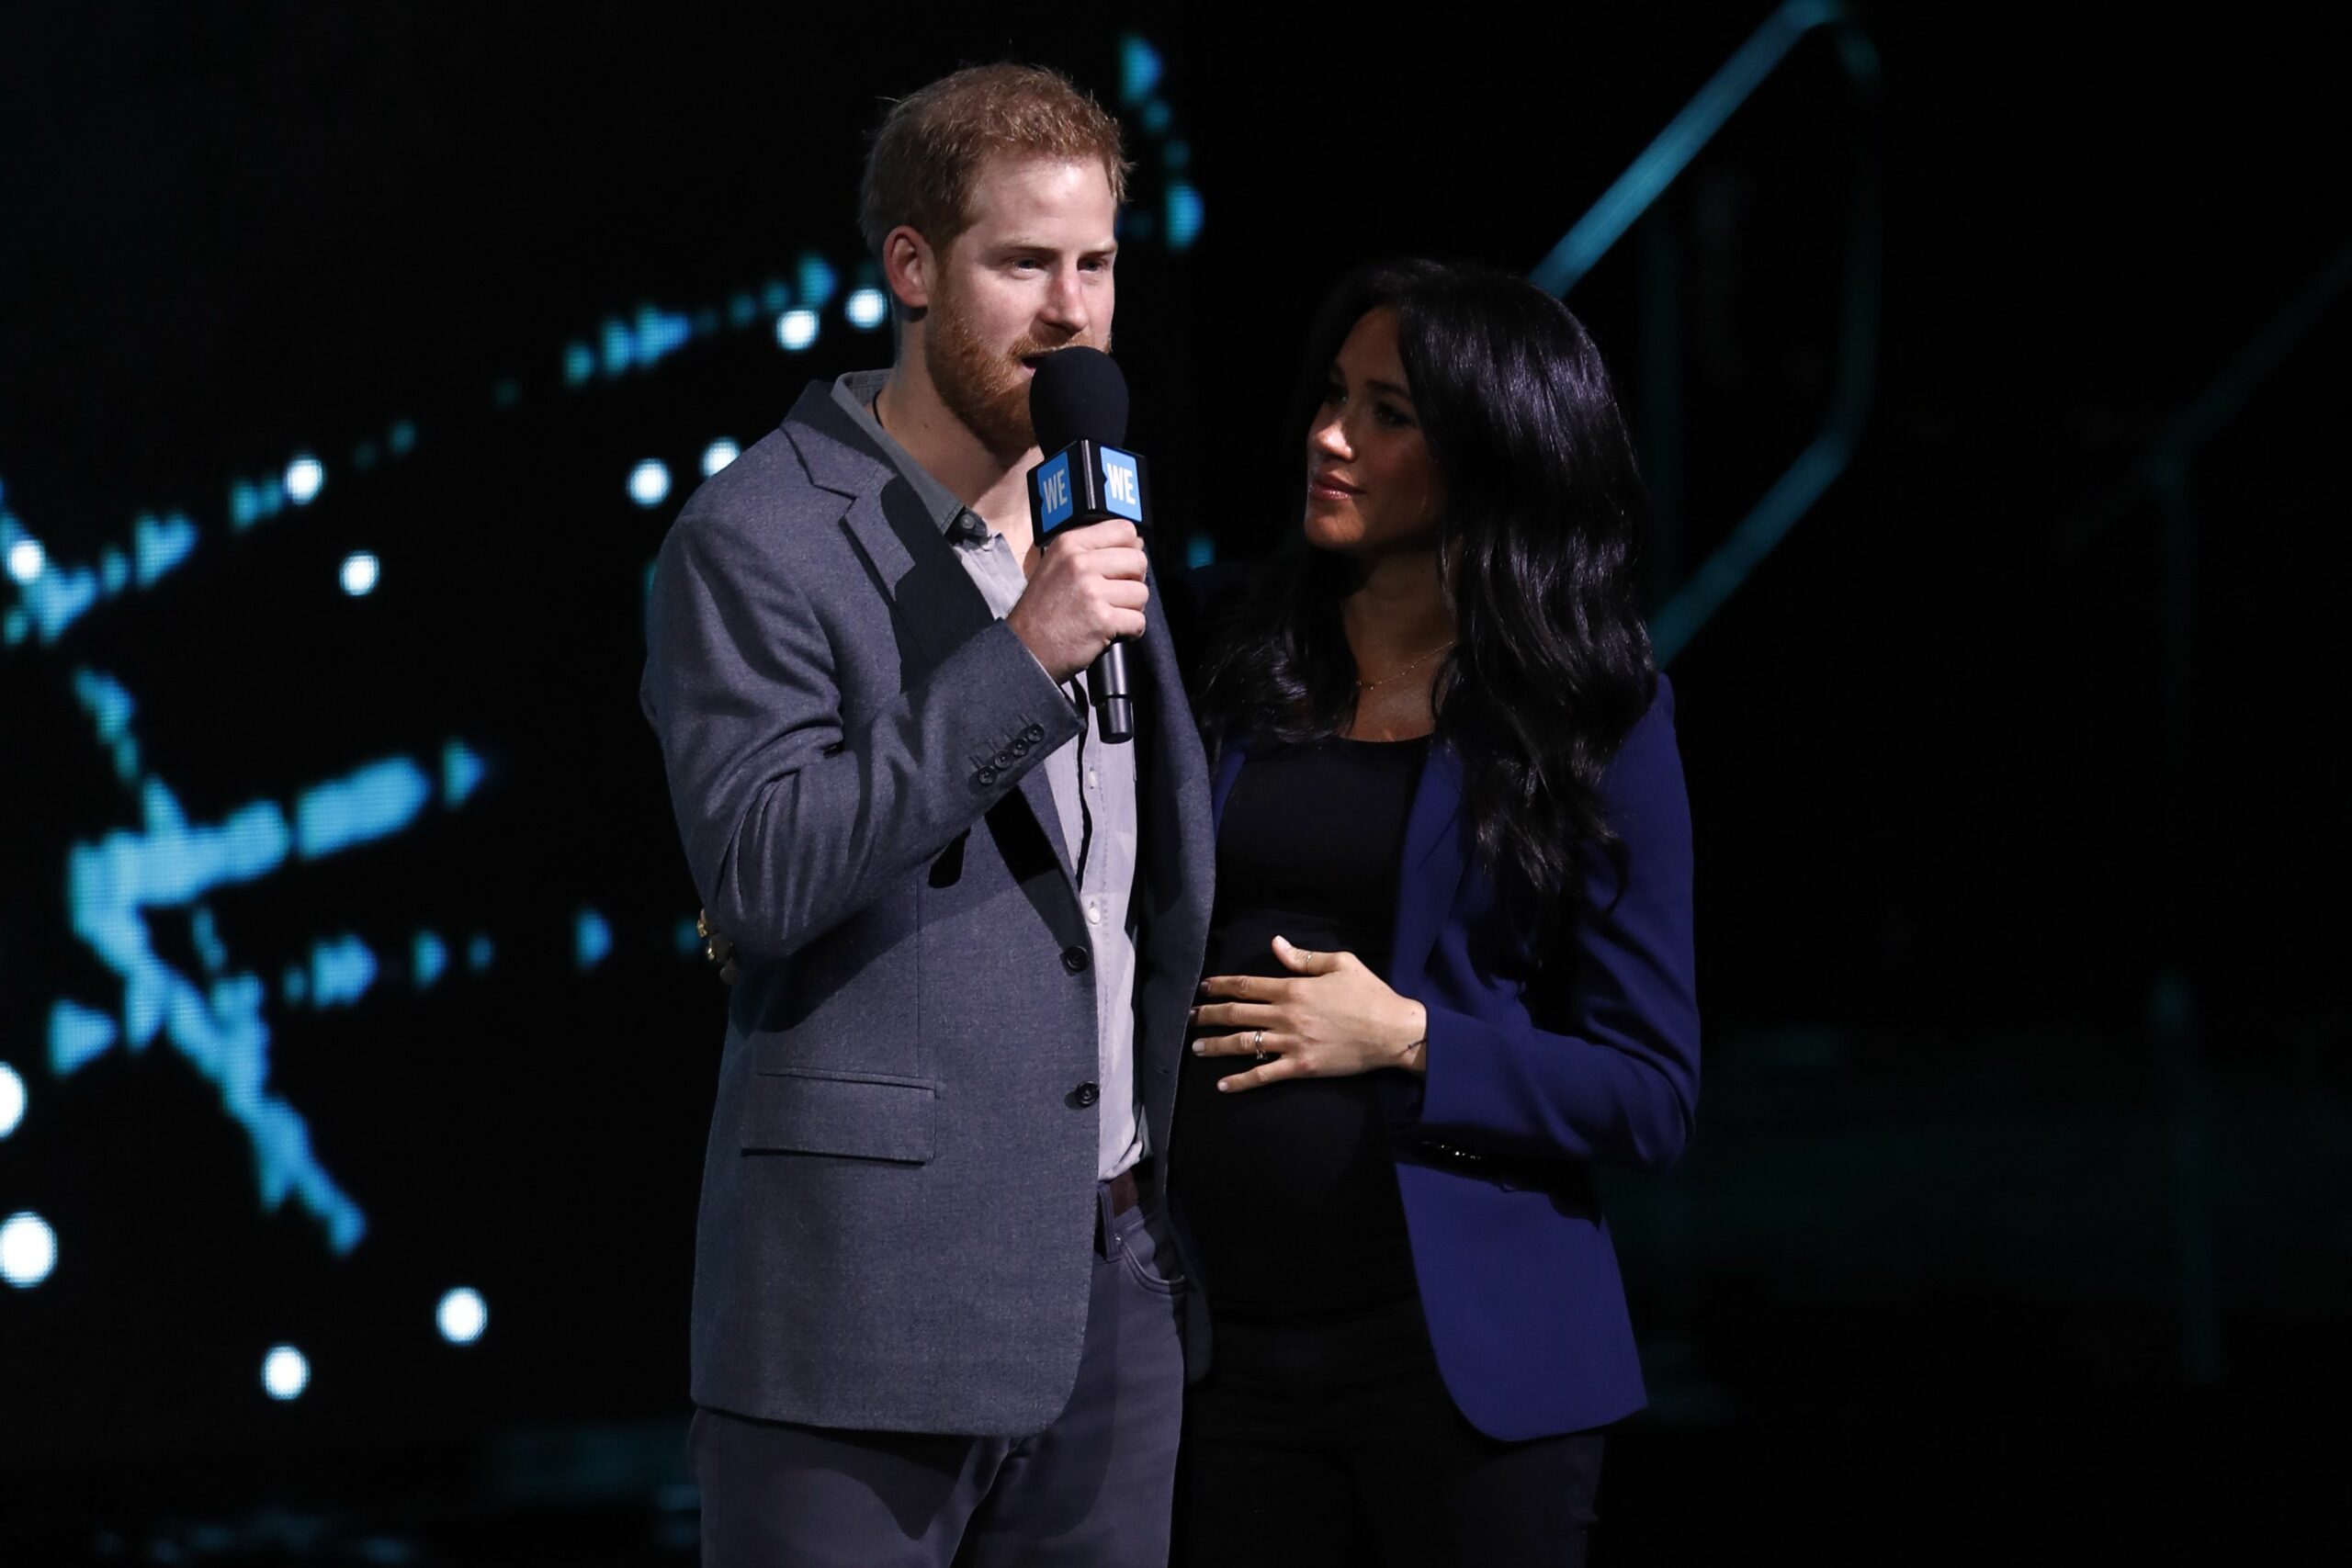 prince-harry-duke-of-sussex-and-meghan-duchess-of-sussex-news-photo-1134001850-1556115497